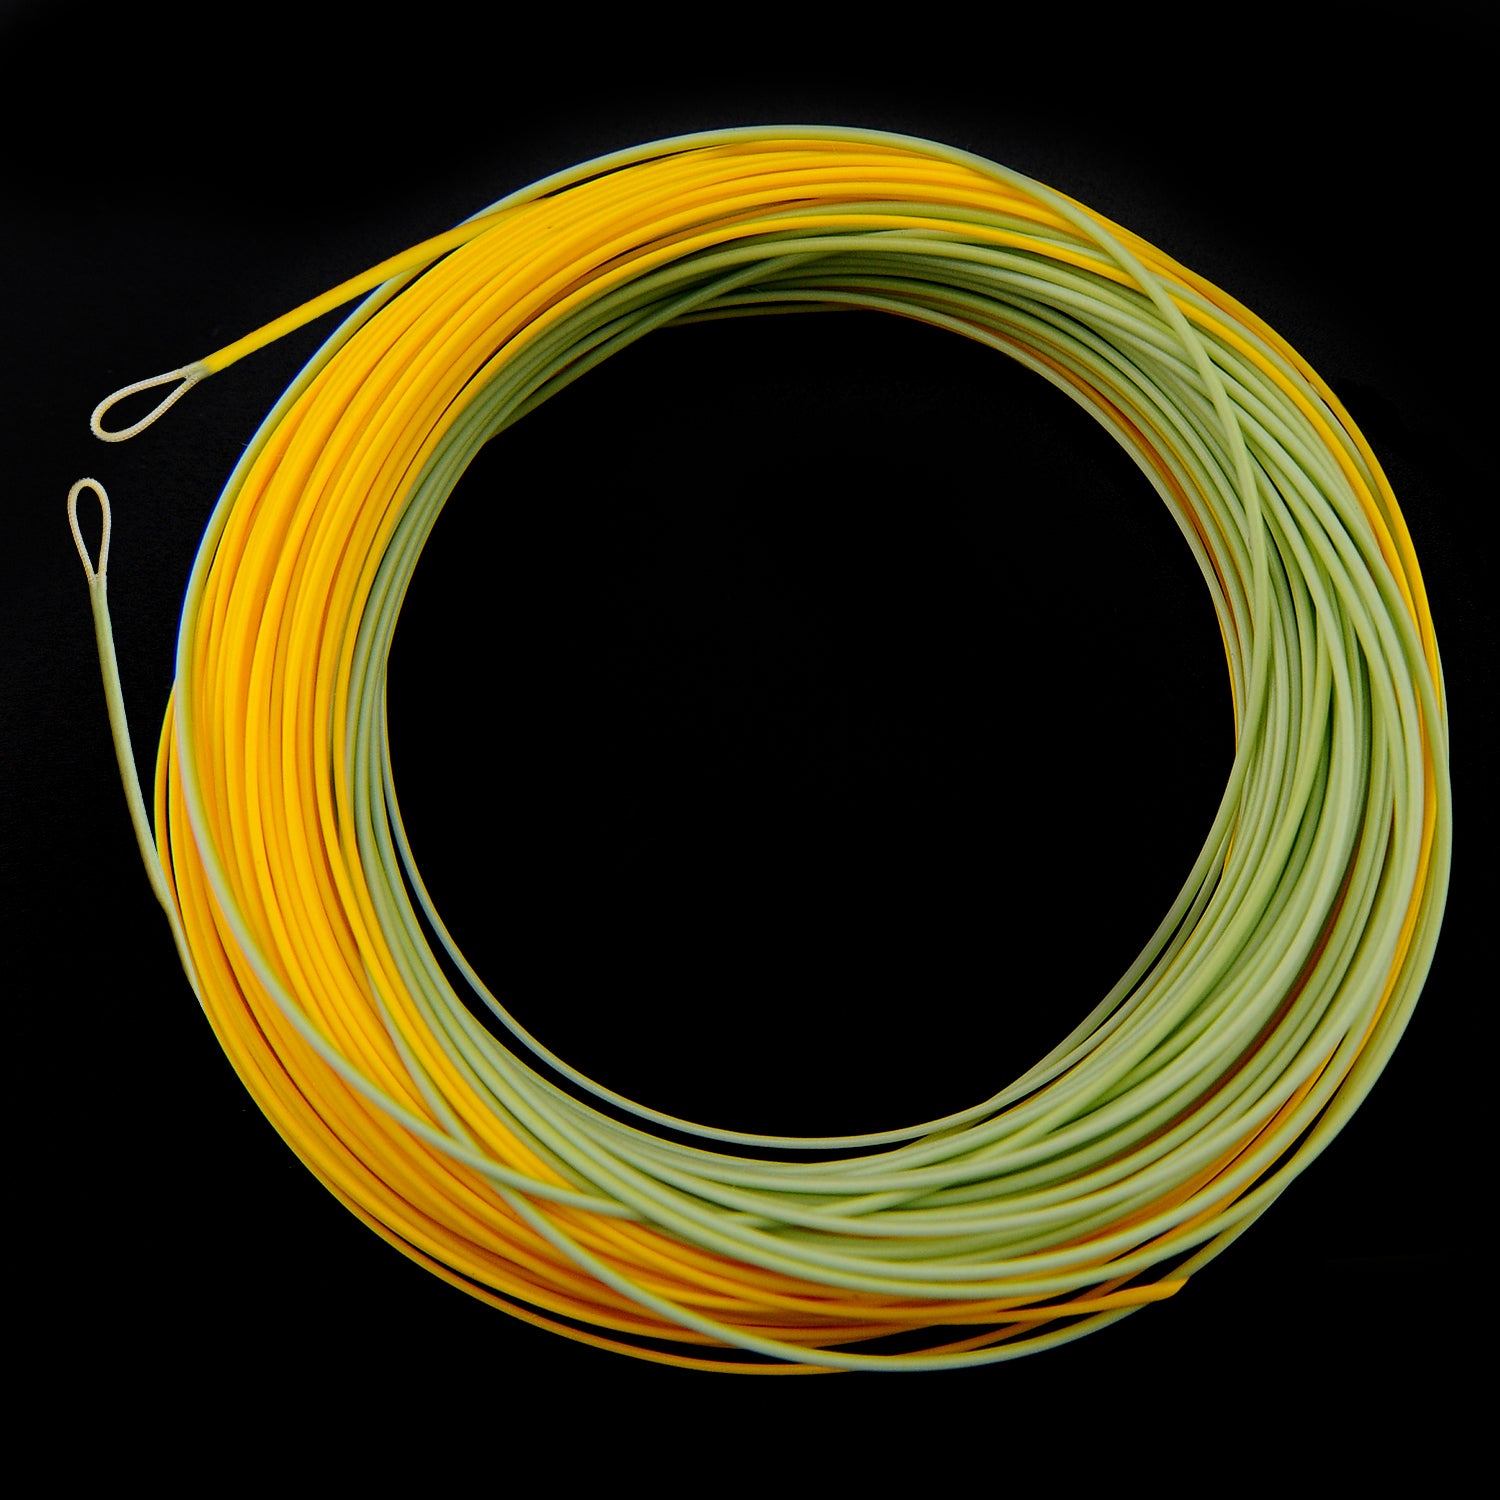 Piscifun Sword Fly Fishing Line  Weight Forward Floating Fly Line